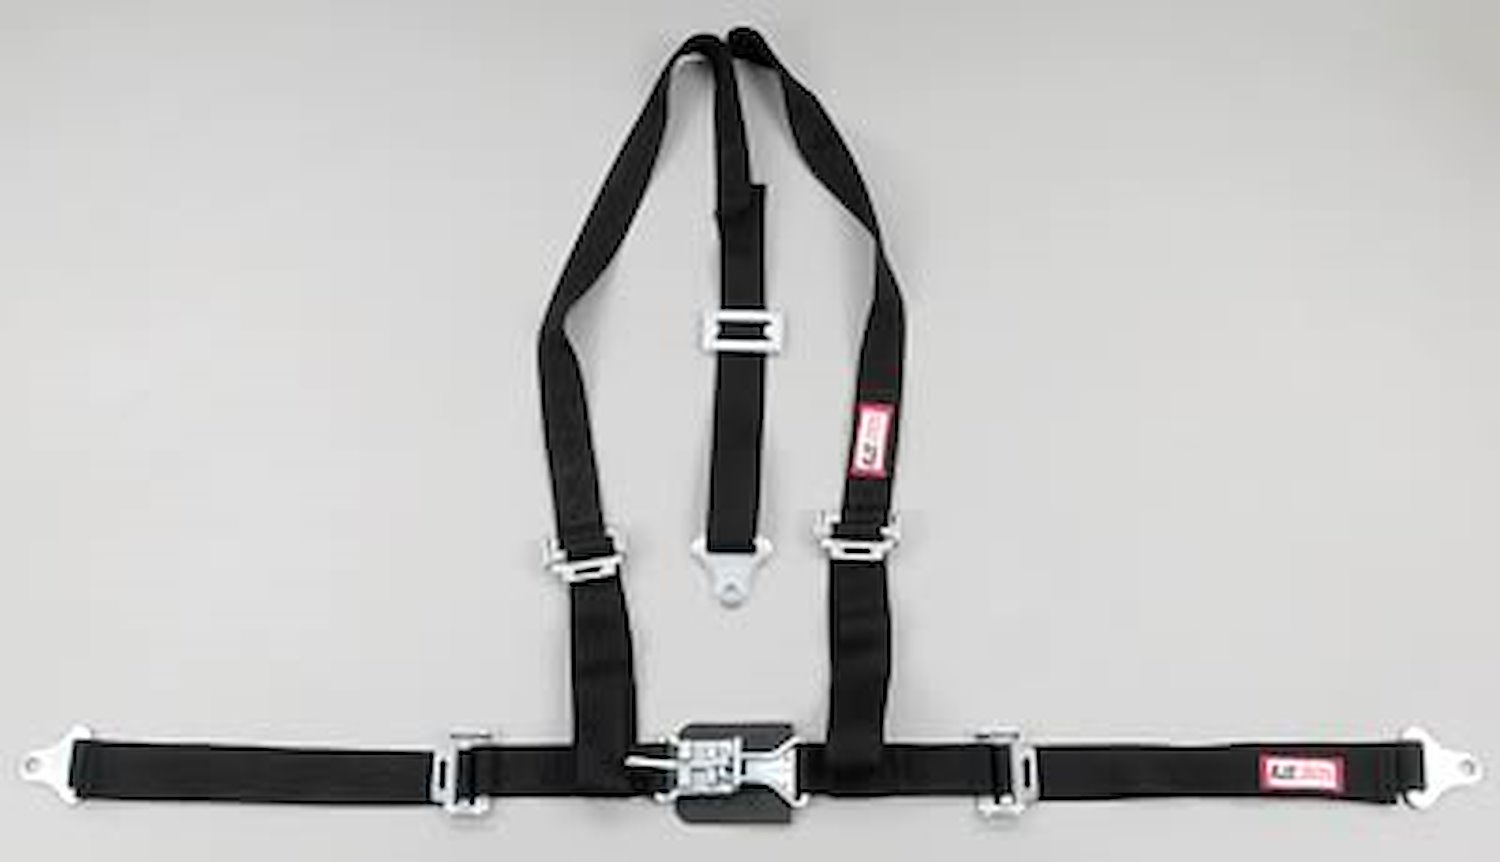 NON-SFI L&L HARNESS 2 PULL UP Lap Belt w/Adjuster SNAP 2 S.H. Individual FLOOR MOUNT w/STERNUM STRAP WRAP/BOLT YELLOW